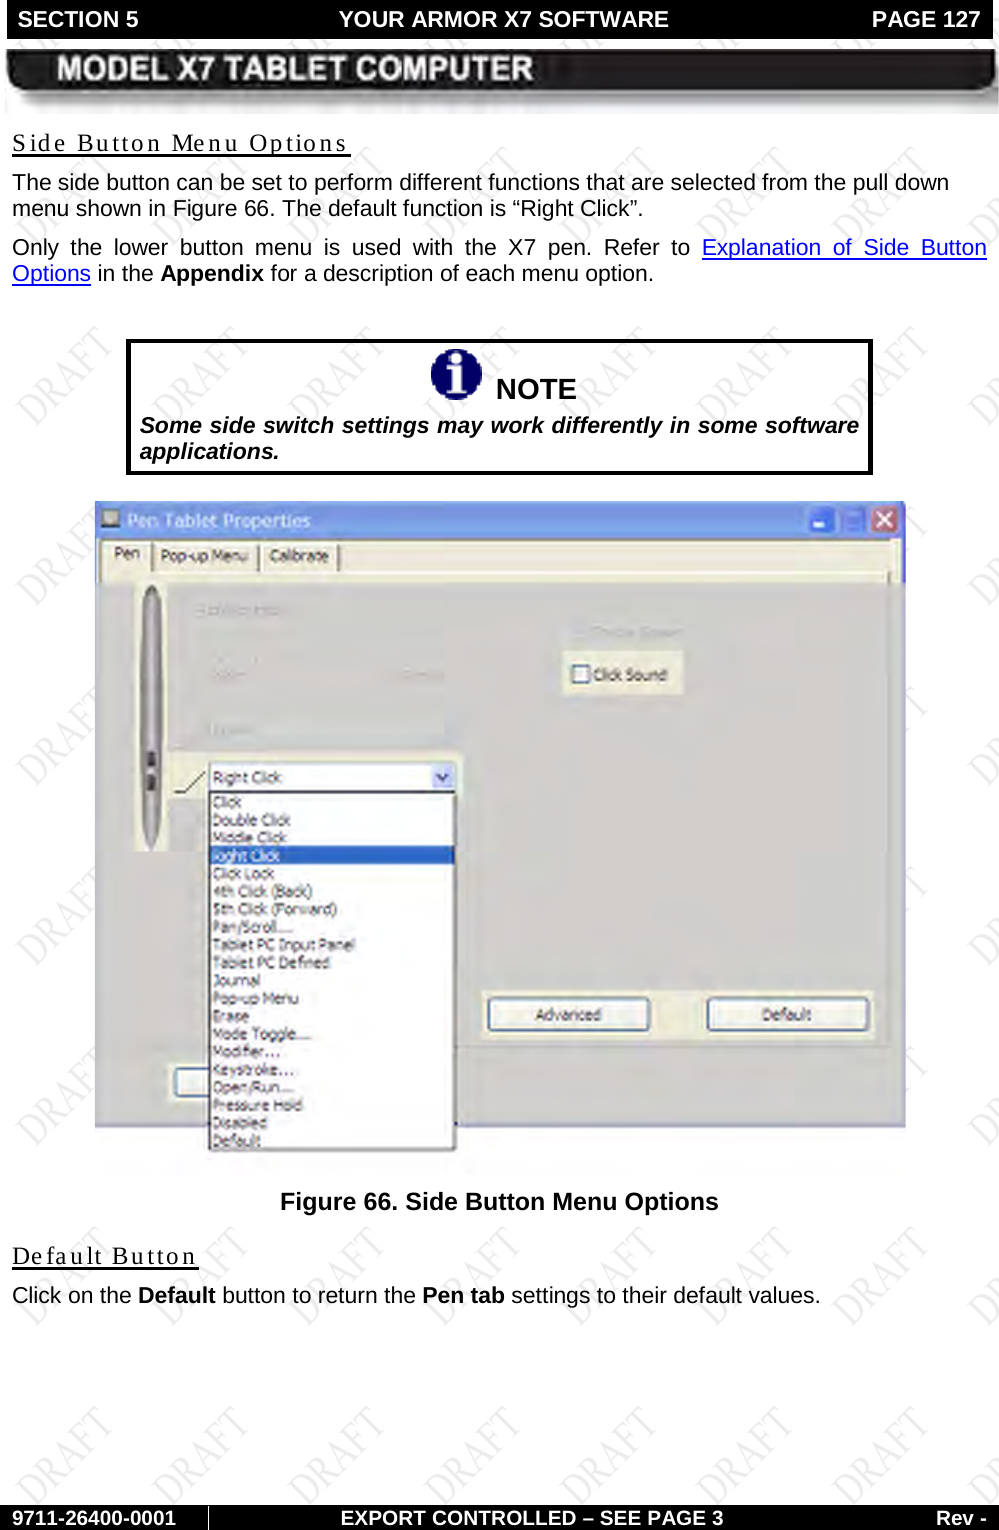 SECTION 5 YOUR ARMOR X7 SOFTWARE  PAGE 127        9711-26400-0001 EXPORT CONTROLLED – SEE PAGE 3 Rev - The side button can be set to perform different functions that are selected from the pull down menu shown in Side Button Menu Options Figure 66. The default function is “Right Click”.  Only the lower button menu is used with the X7 pen. Refer to Explanation of Side Button Options in the Appendix for a description of each menu option.     NOTE Some side switch settings may work differently in some software applications.   Figure 66. Side Button Menu Options Click on the Default button to return the Pen tab settings to their default values. Default Button   